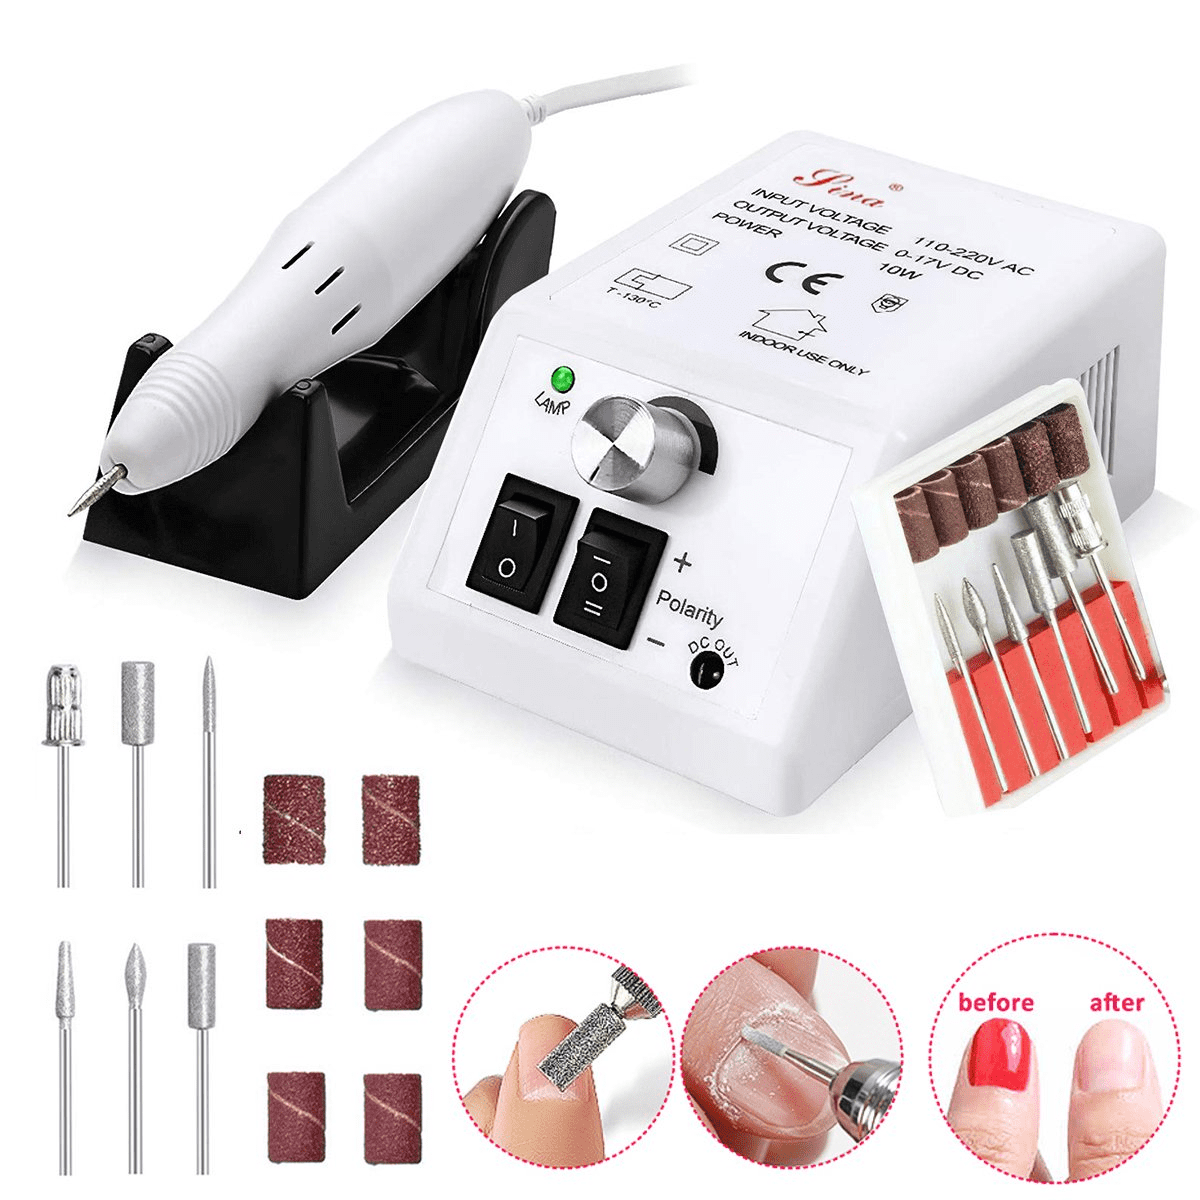 Buy Cordless Nail Drill for Acrylic Nails,Belle Wireless Electric Efile Nail  Machine Kit with Bits and Sanding Bands,Portable Rechargeable Nail Machine  File for Manicure Pedicure Online at Low Prices in India -